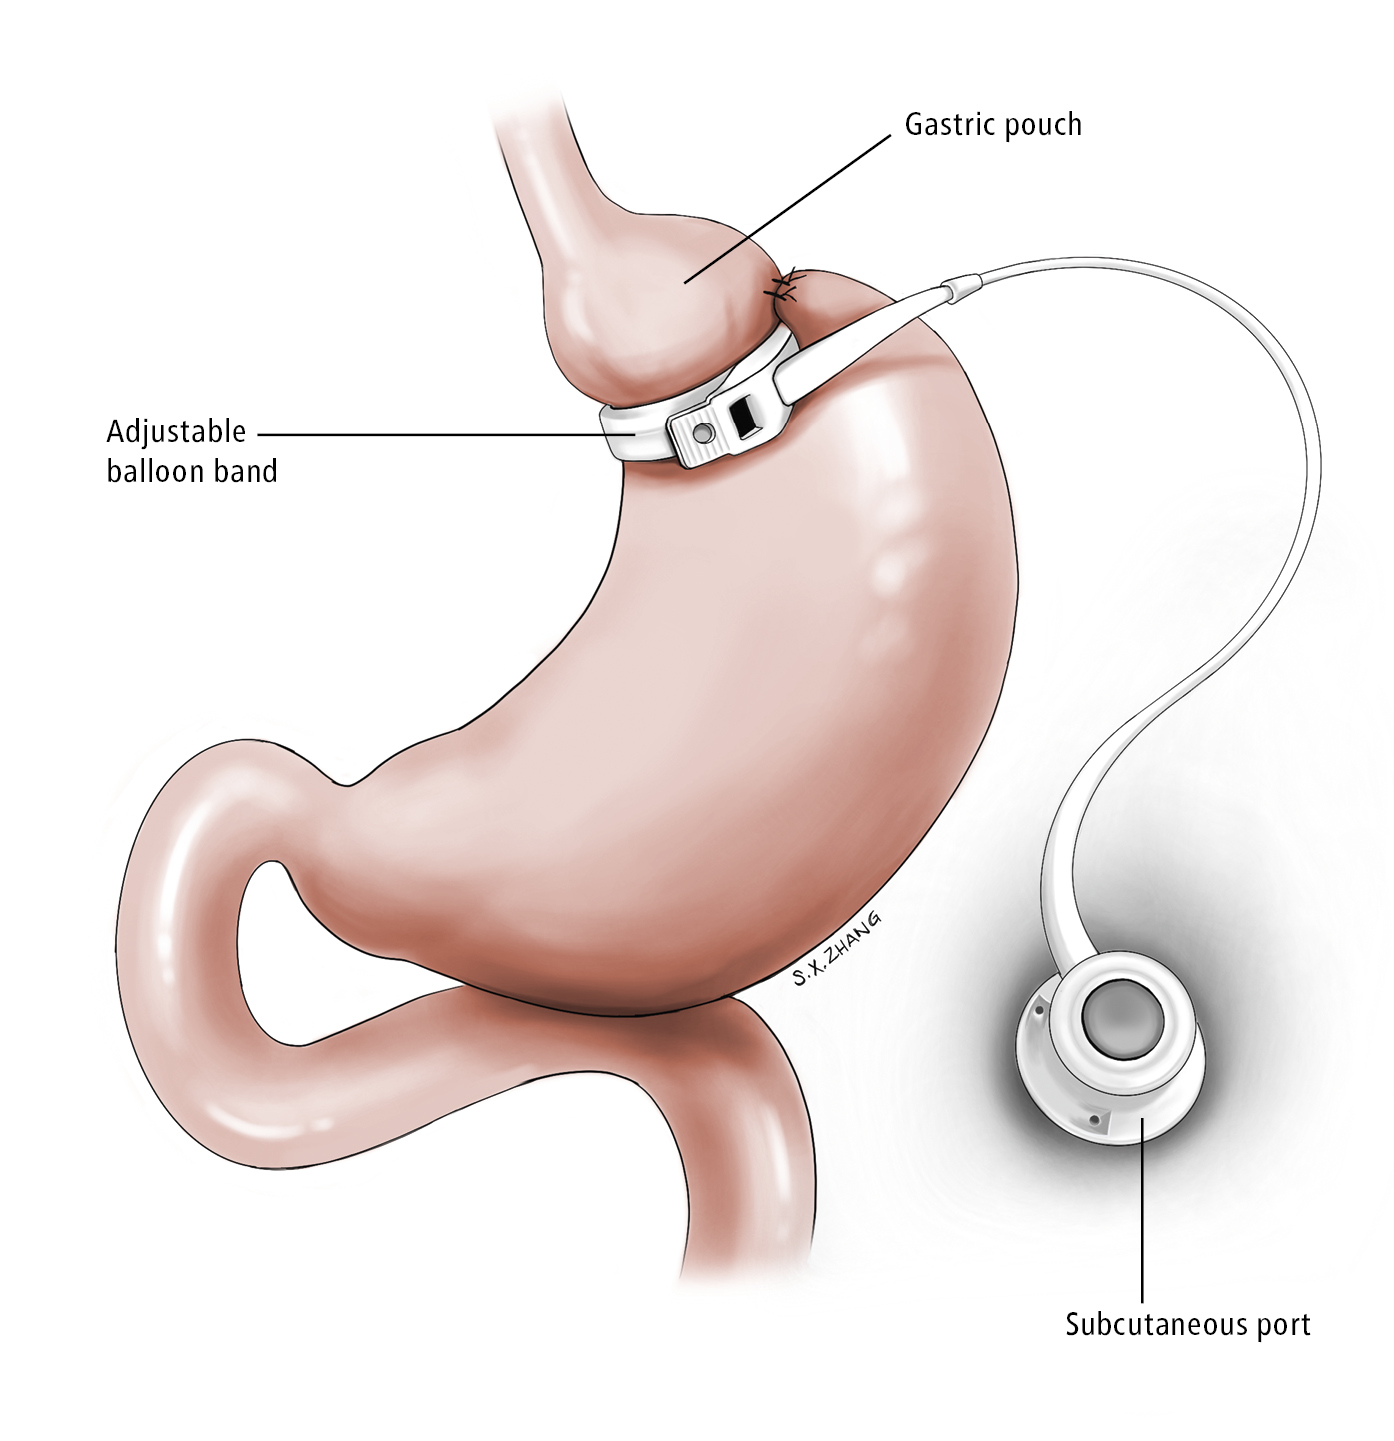 Figure 031_8858.  Gastric band.  Illustration courtesy of Dr Shannon Zhang.  